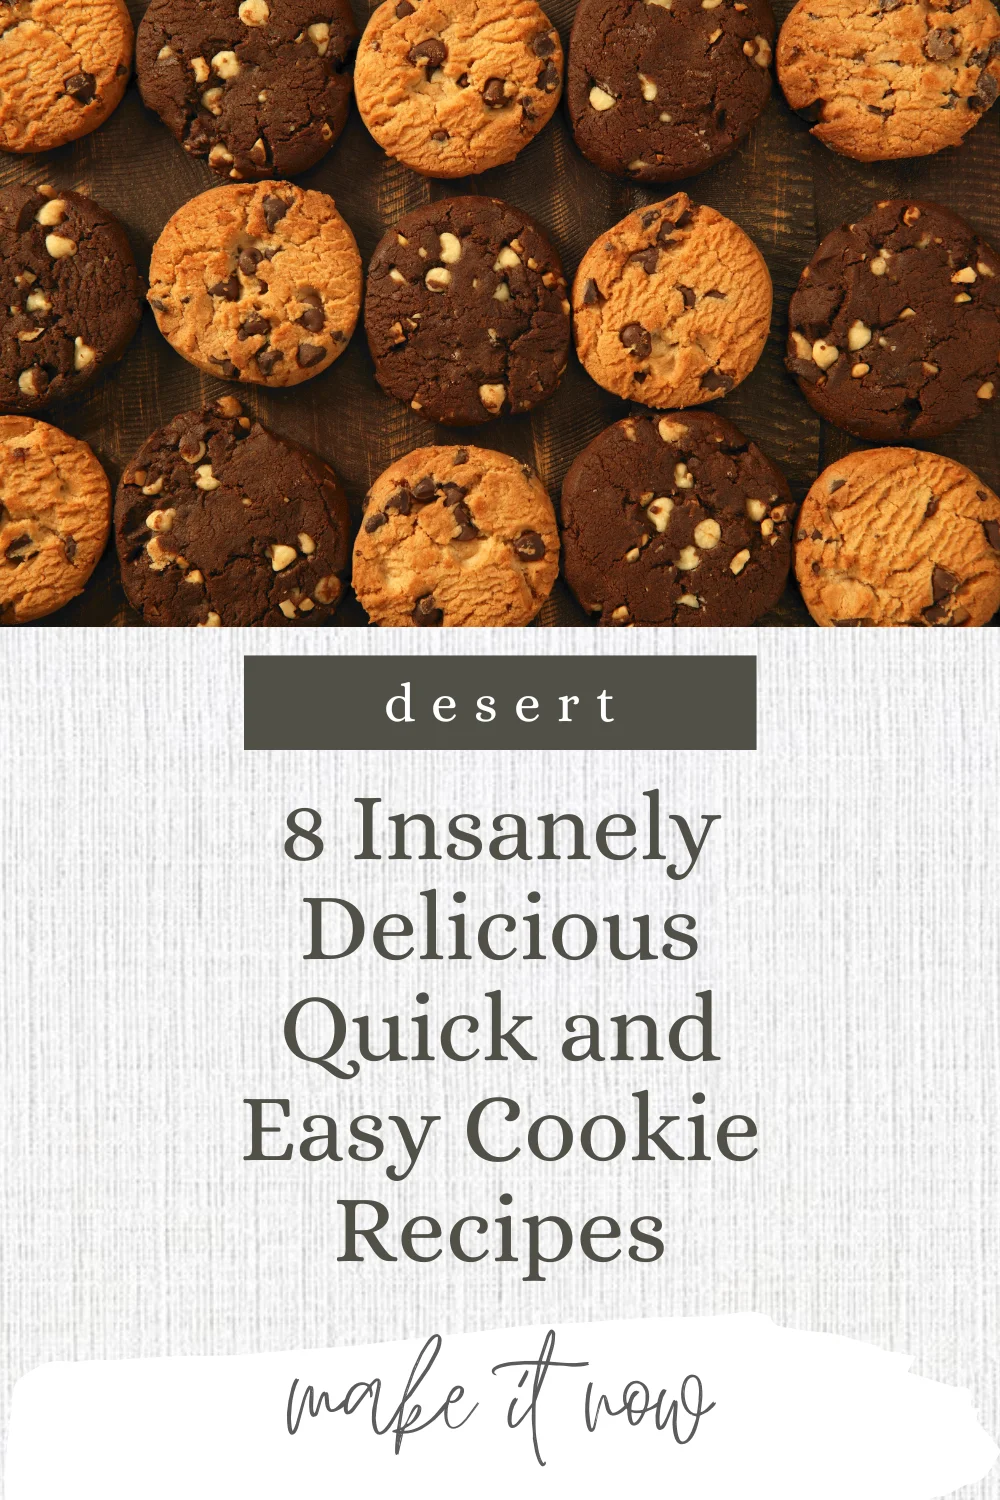 Freshly baked chocolate chip cookies - the epitome of quick and easy homemade treats